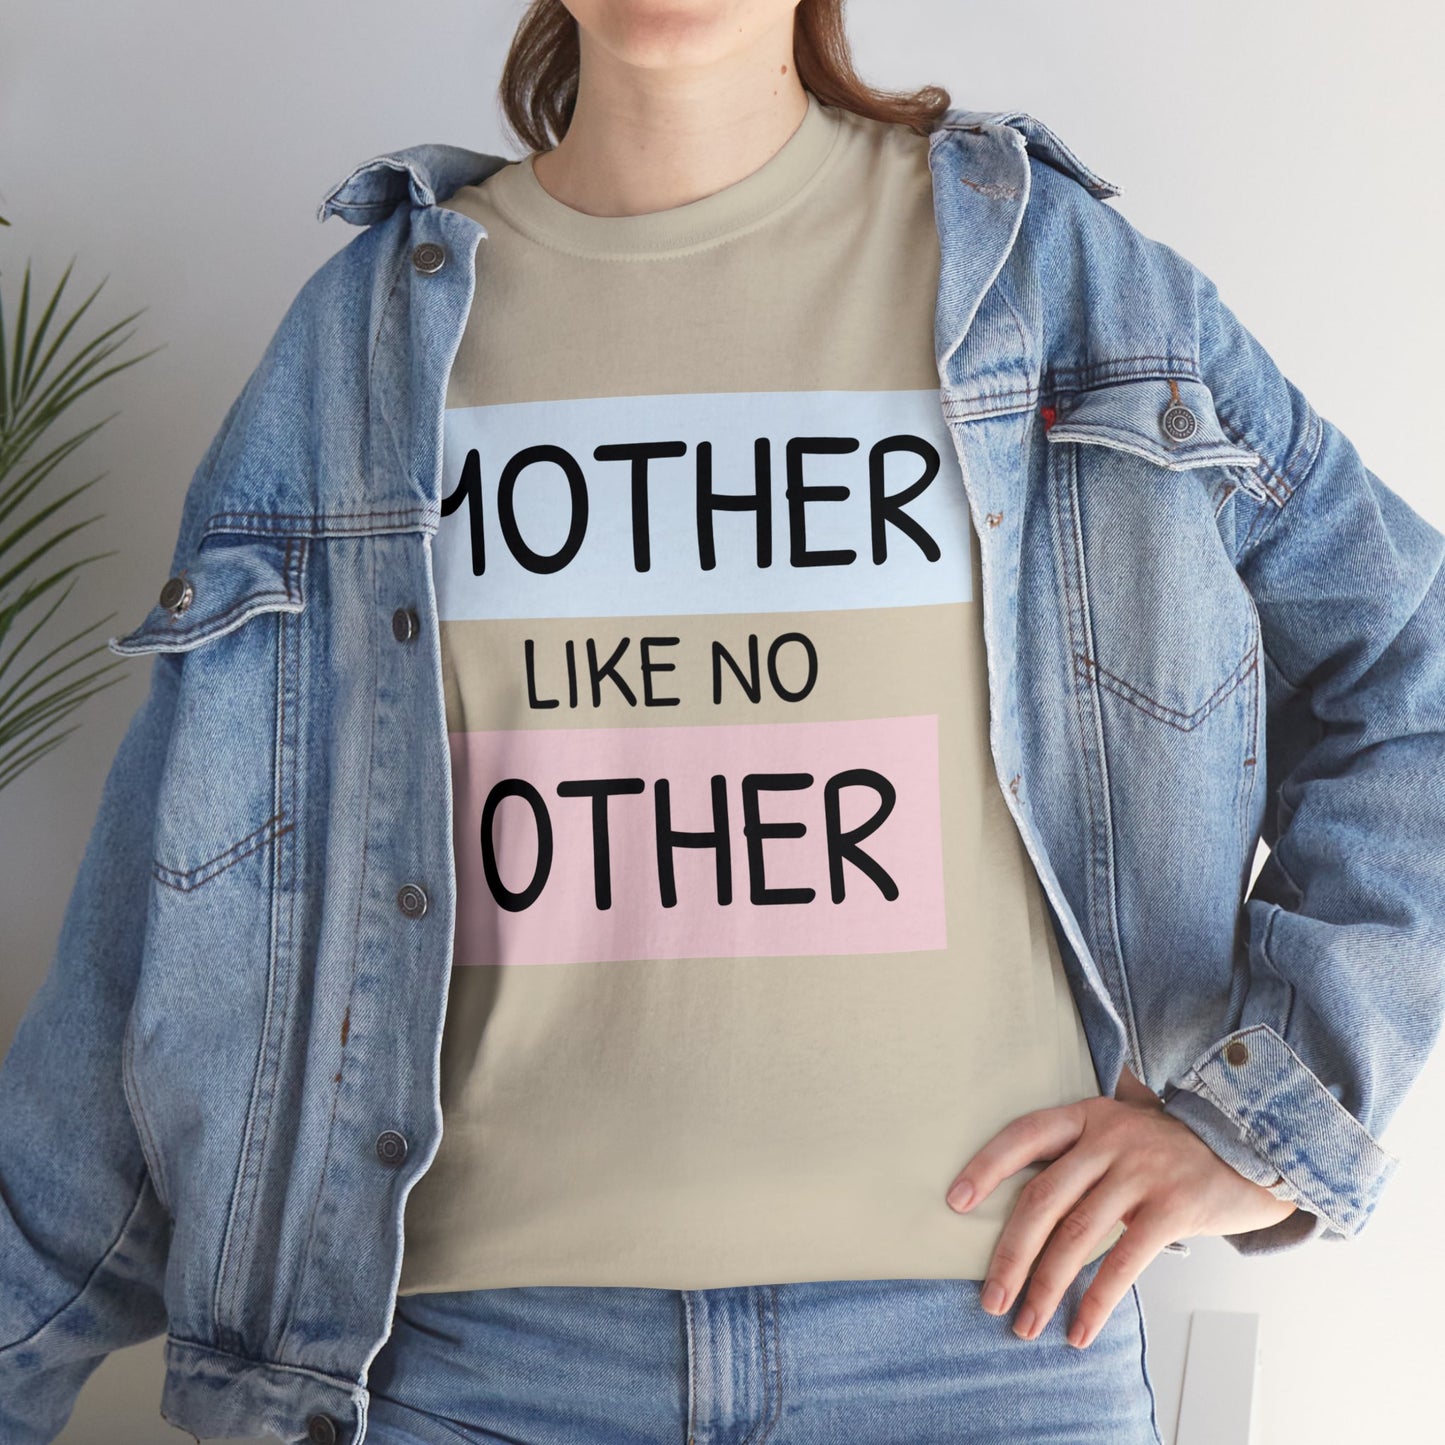 Mother Like No Other TEE